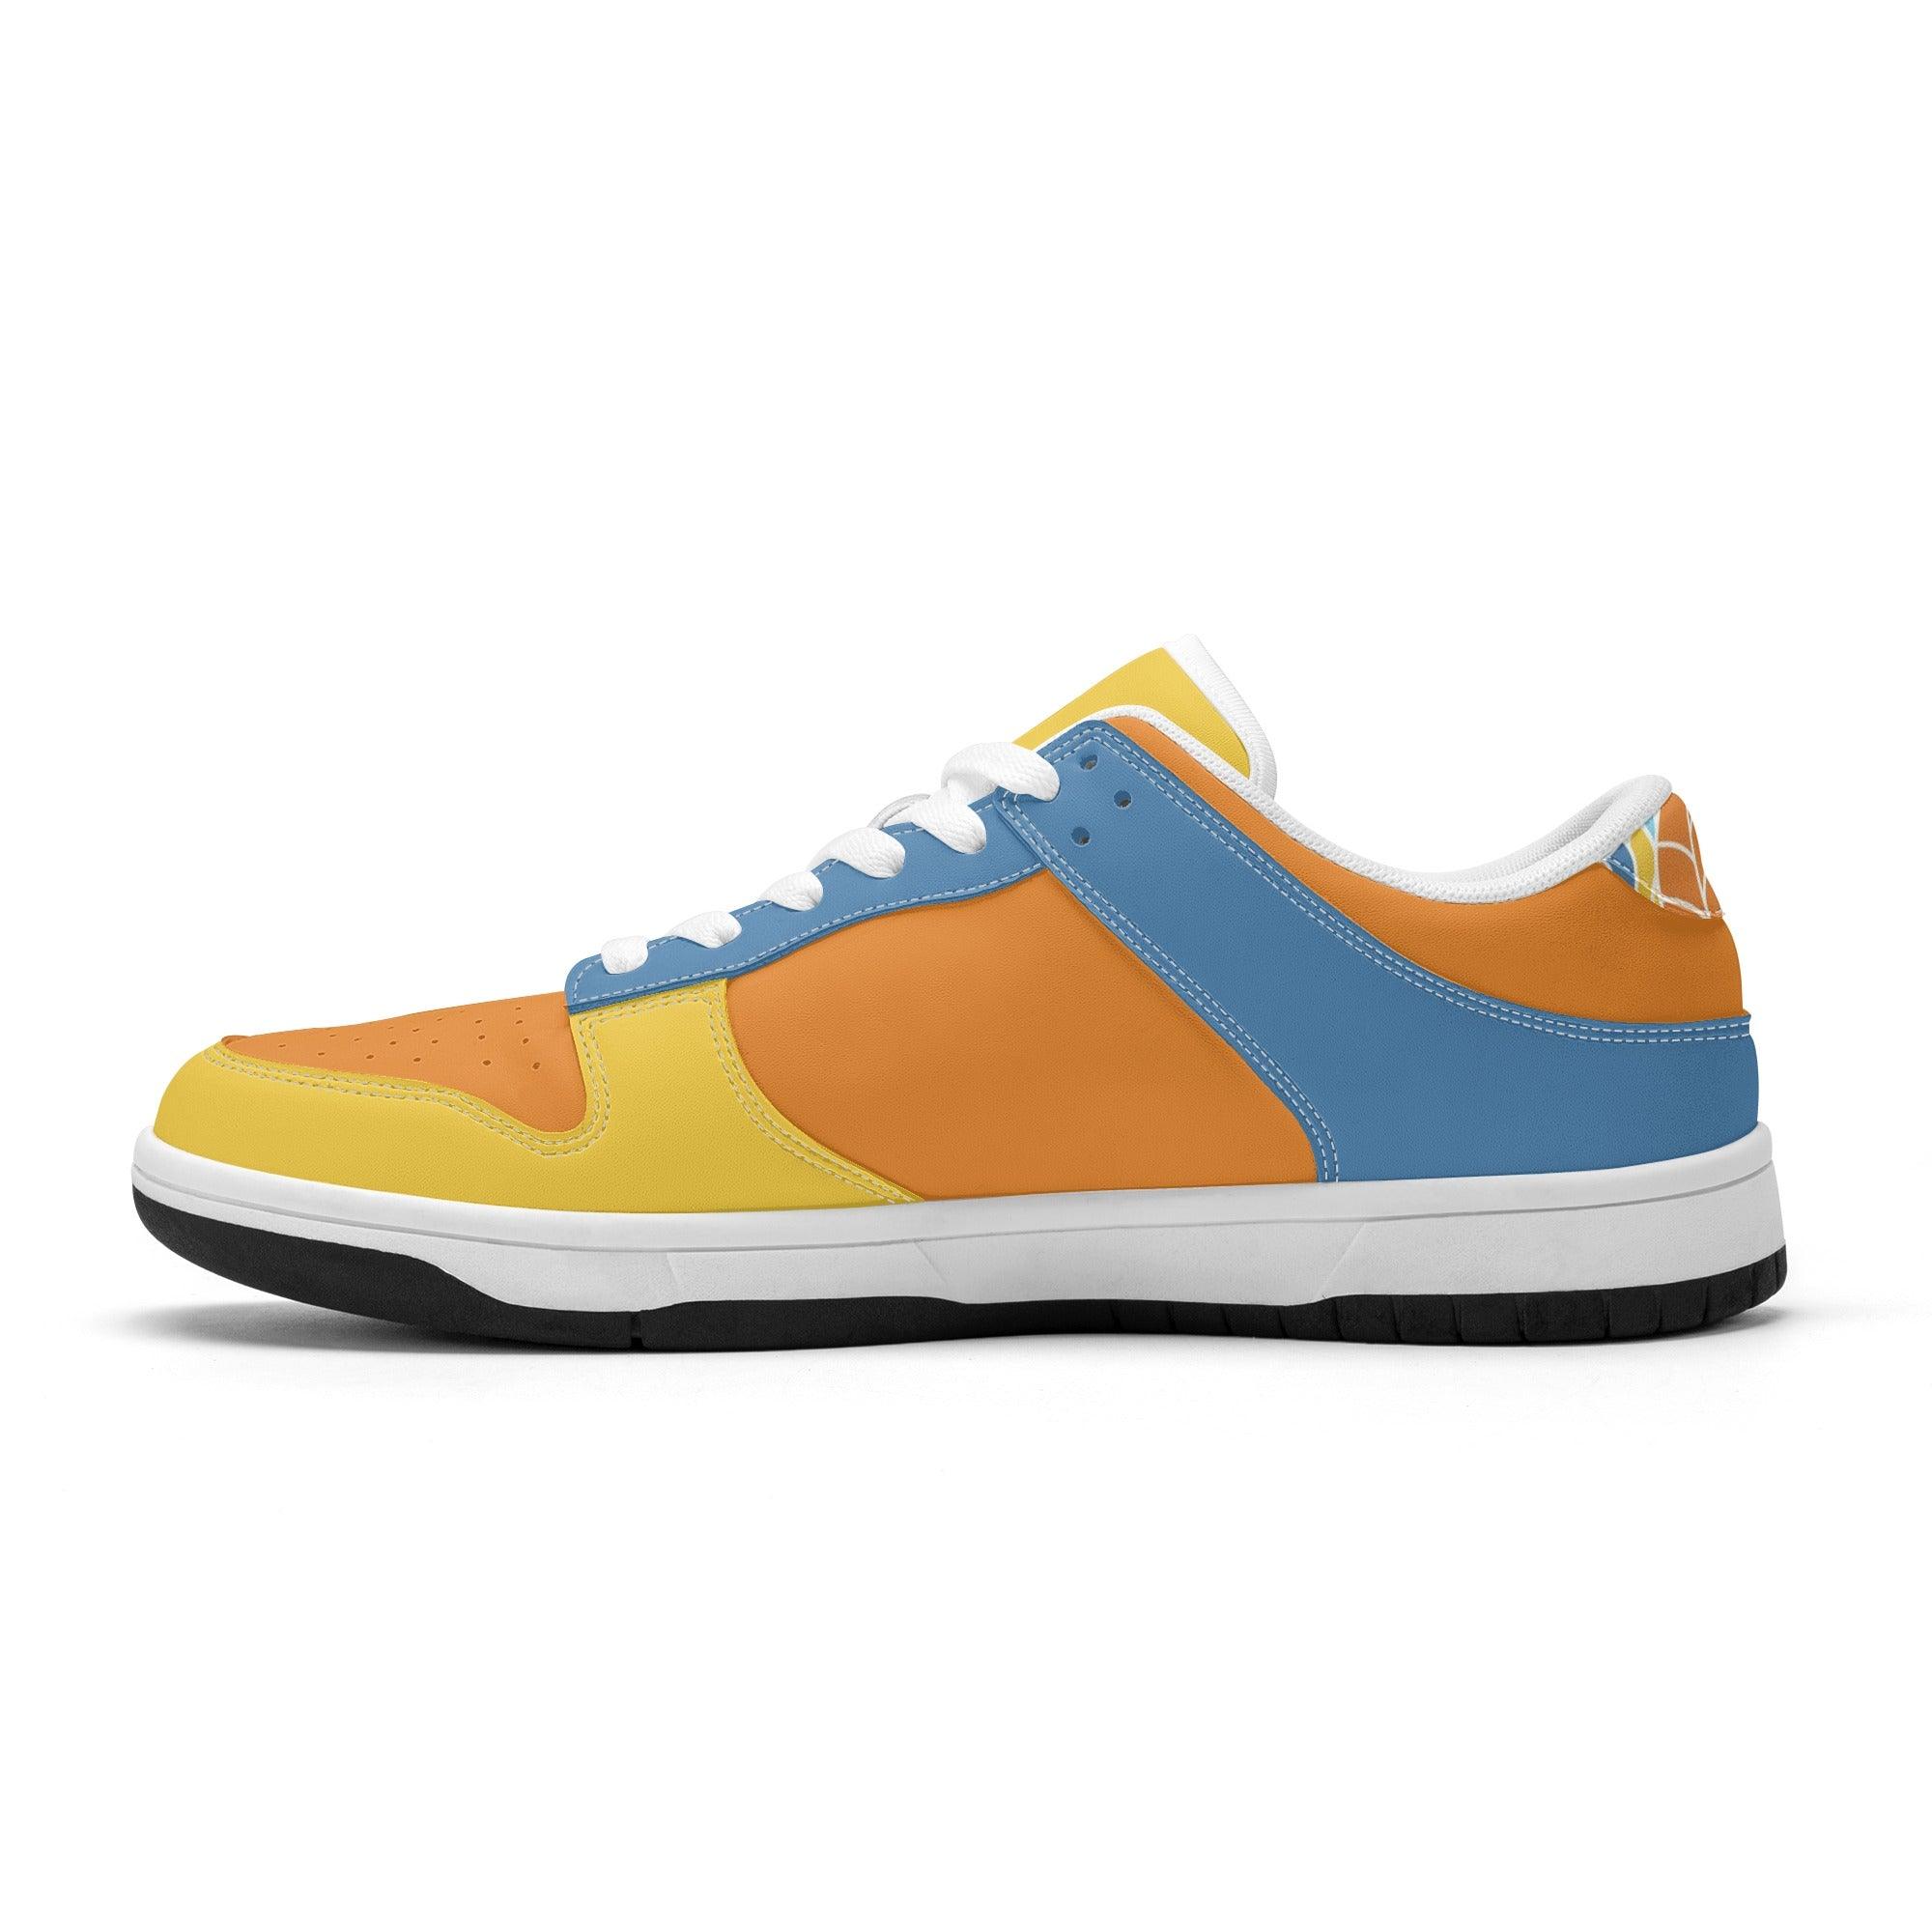 Pinsa Tri-color Low Top Sneakers - Blissfully Brand